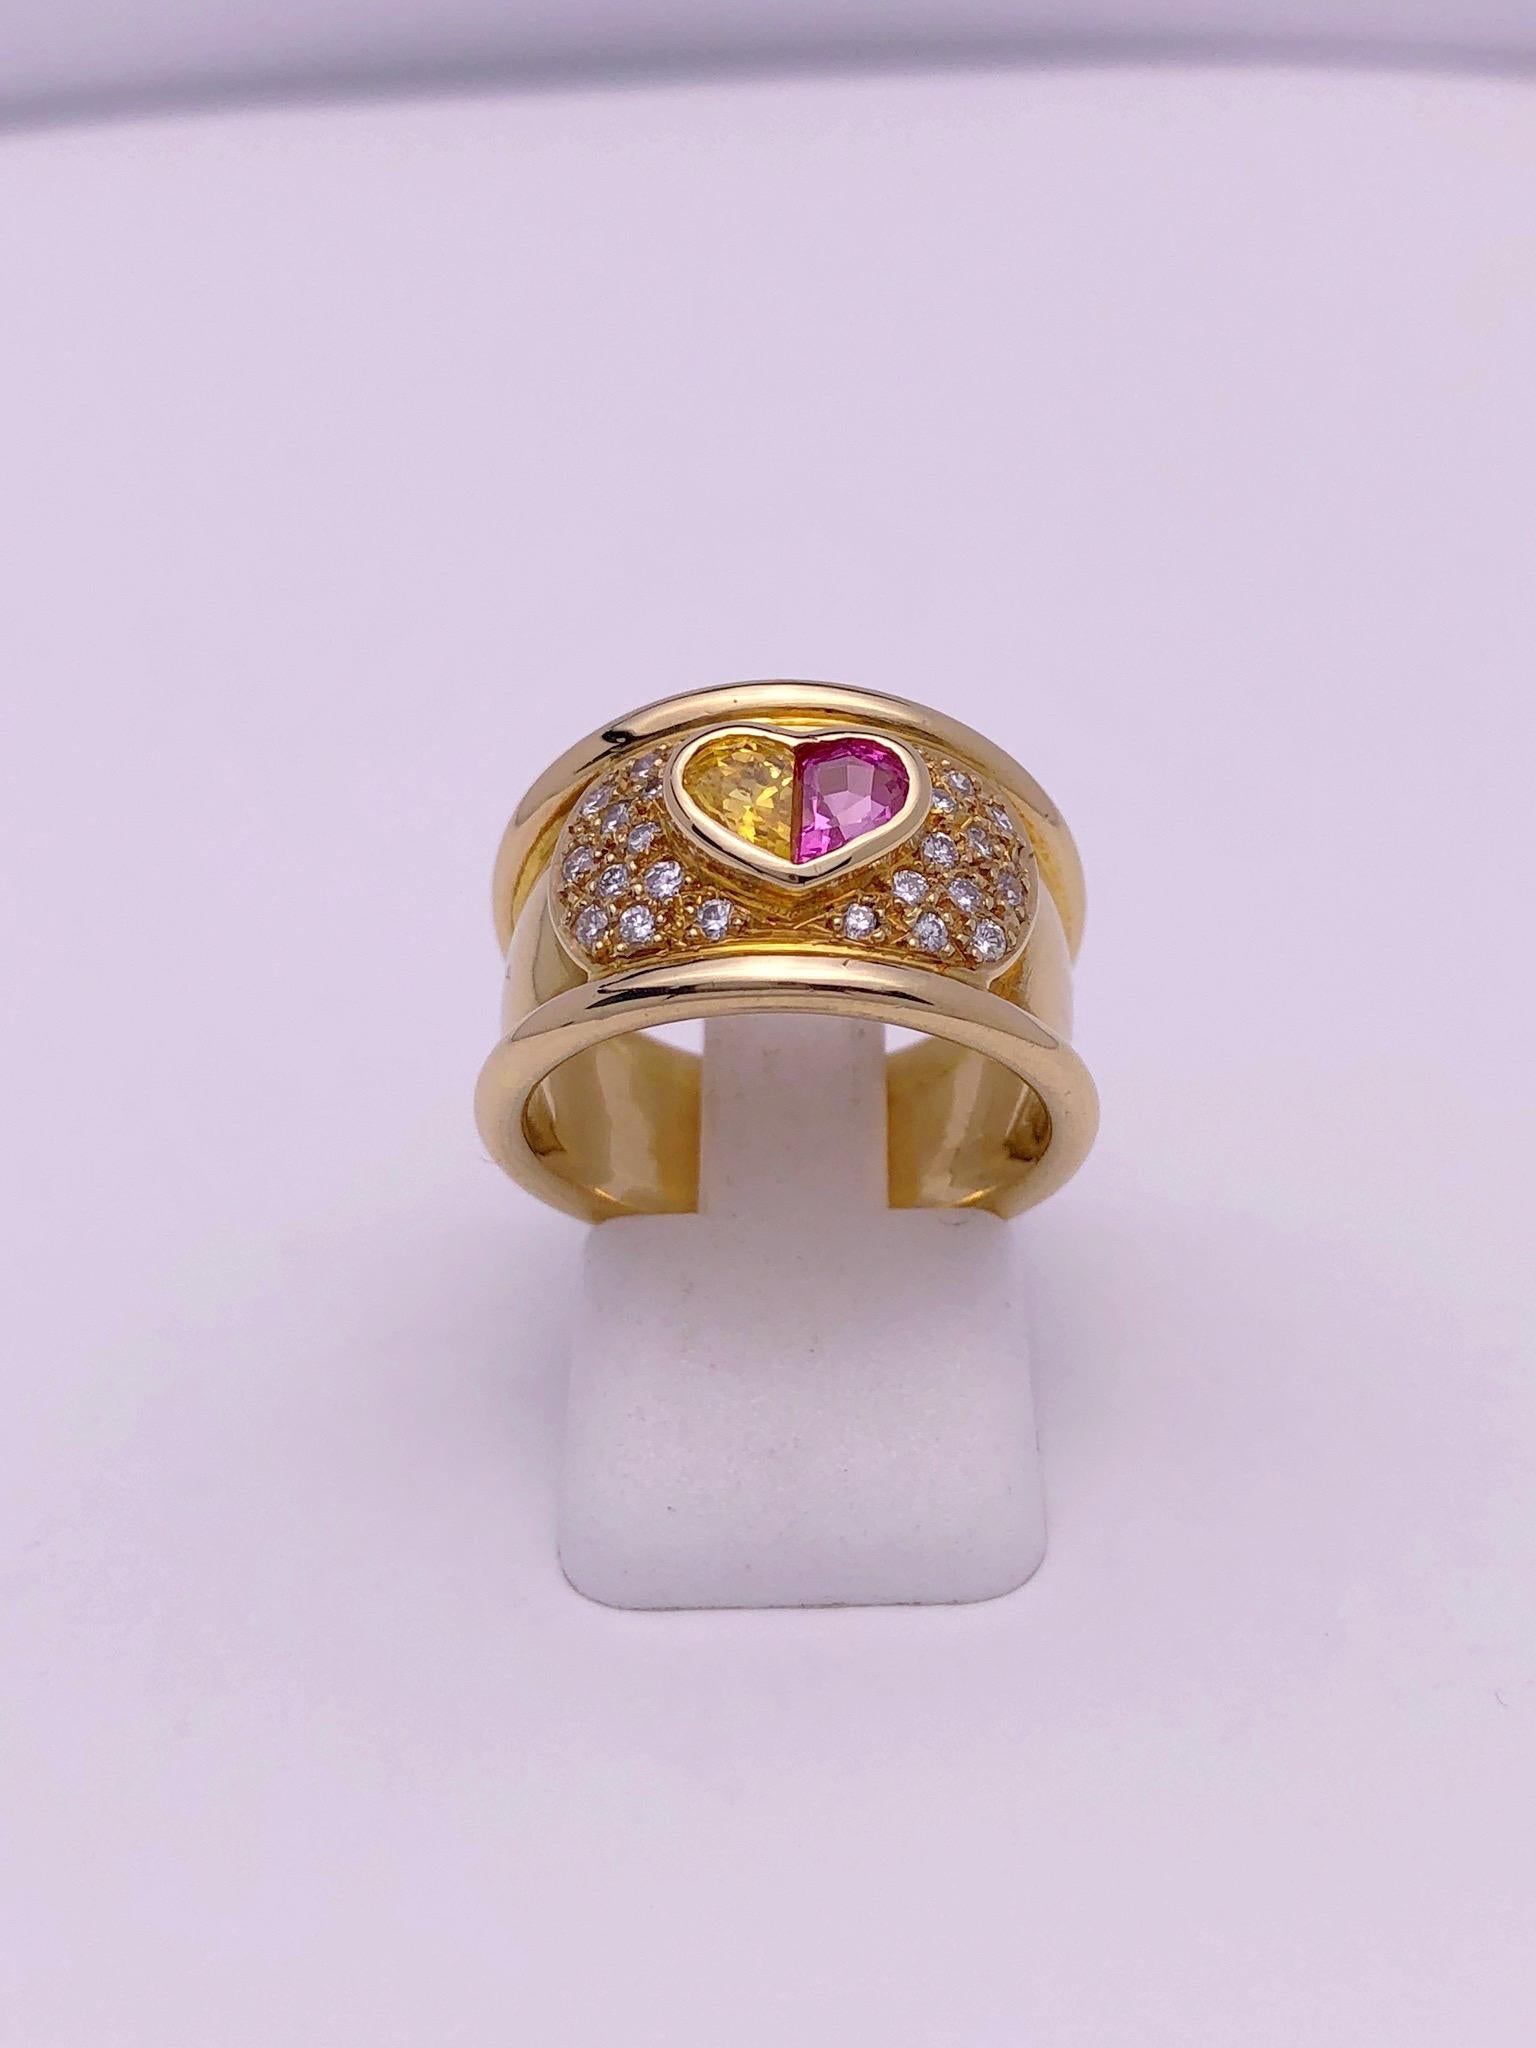 This band ring centers an 18 karat yellow gold heart bezel set with two sapphires. One yellow sapphire and one pink sapphire set side by side form the heart. The heart sits amid a pave diamond section. Two raised bezels form the outer portions of